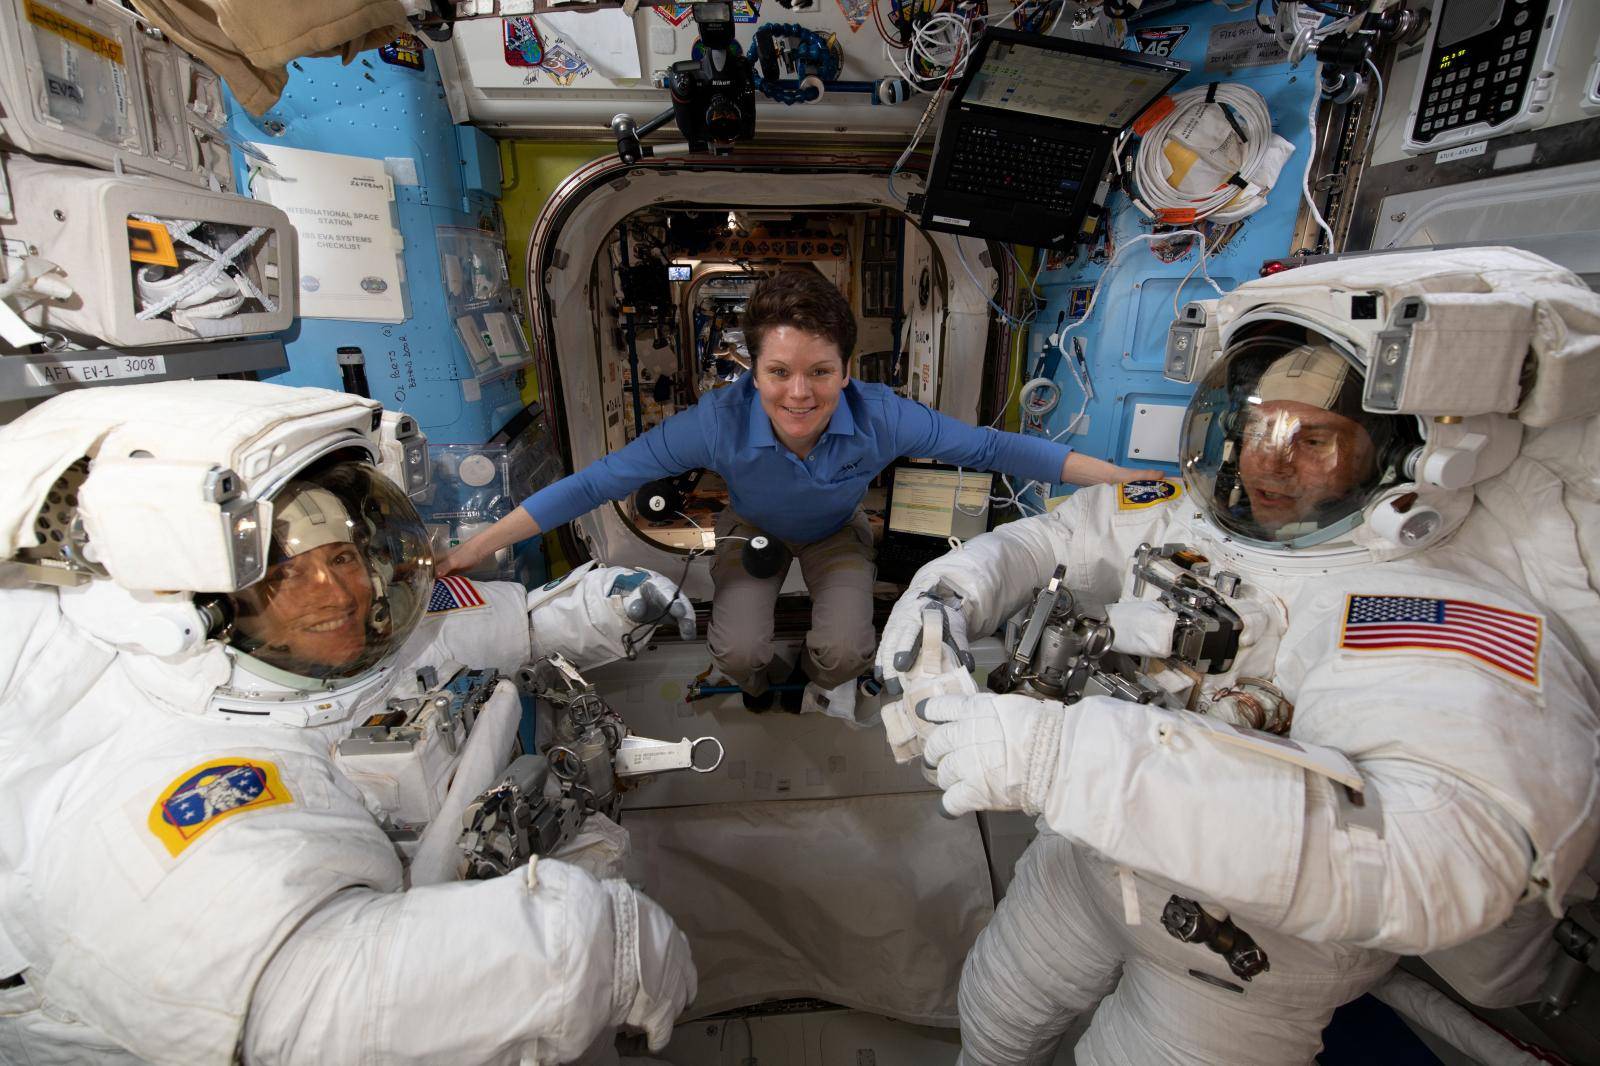 Astronaut Anne McClain assists fellow astronauts Christina Koch and Nick Hague ahead of a set of upcoming spacewalks at the International Space Station